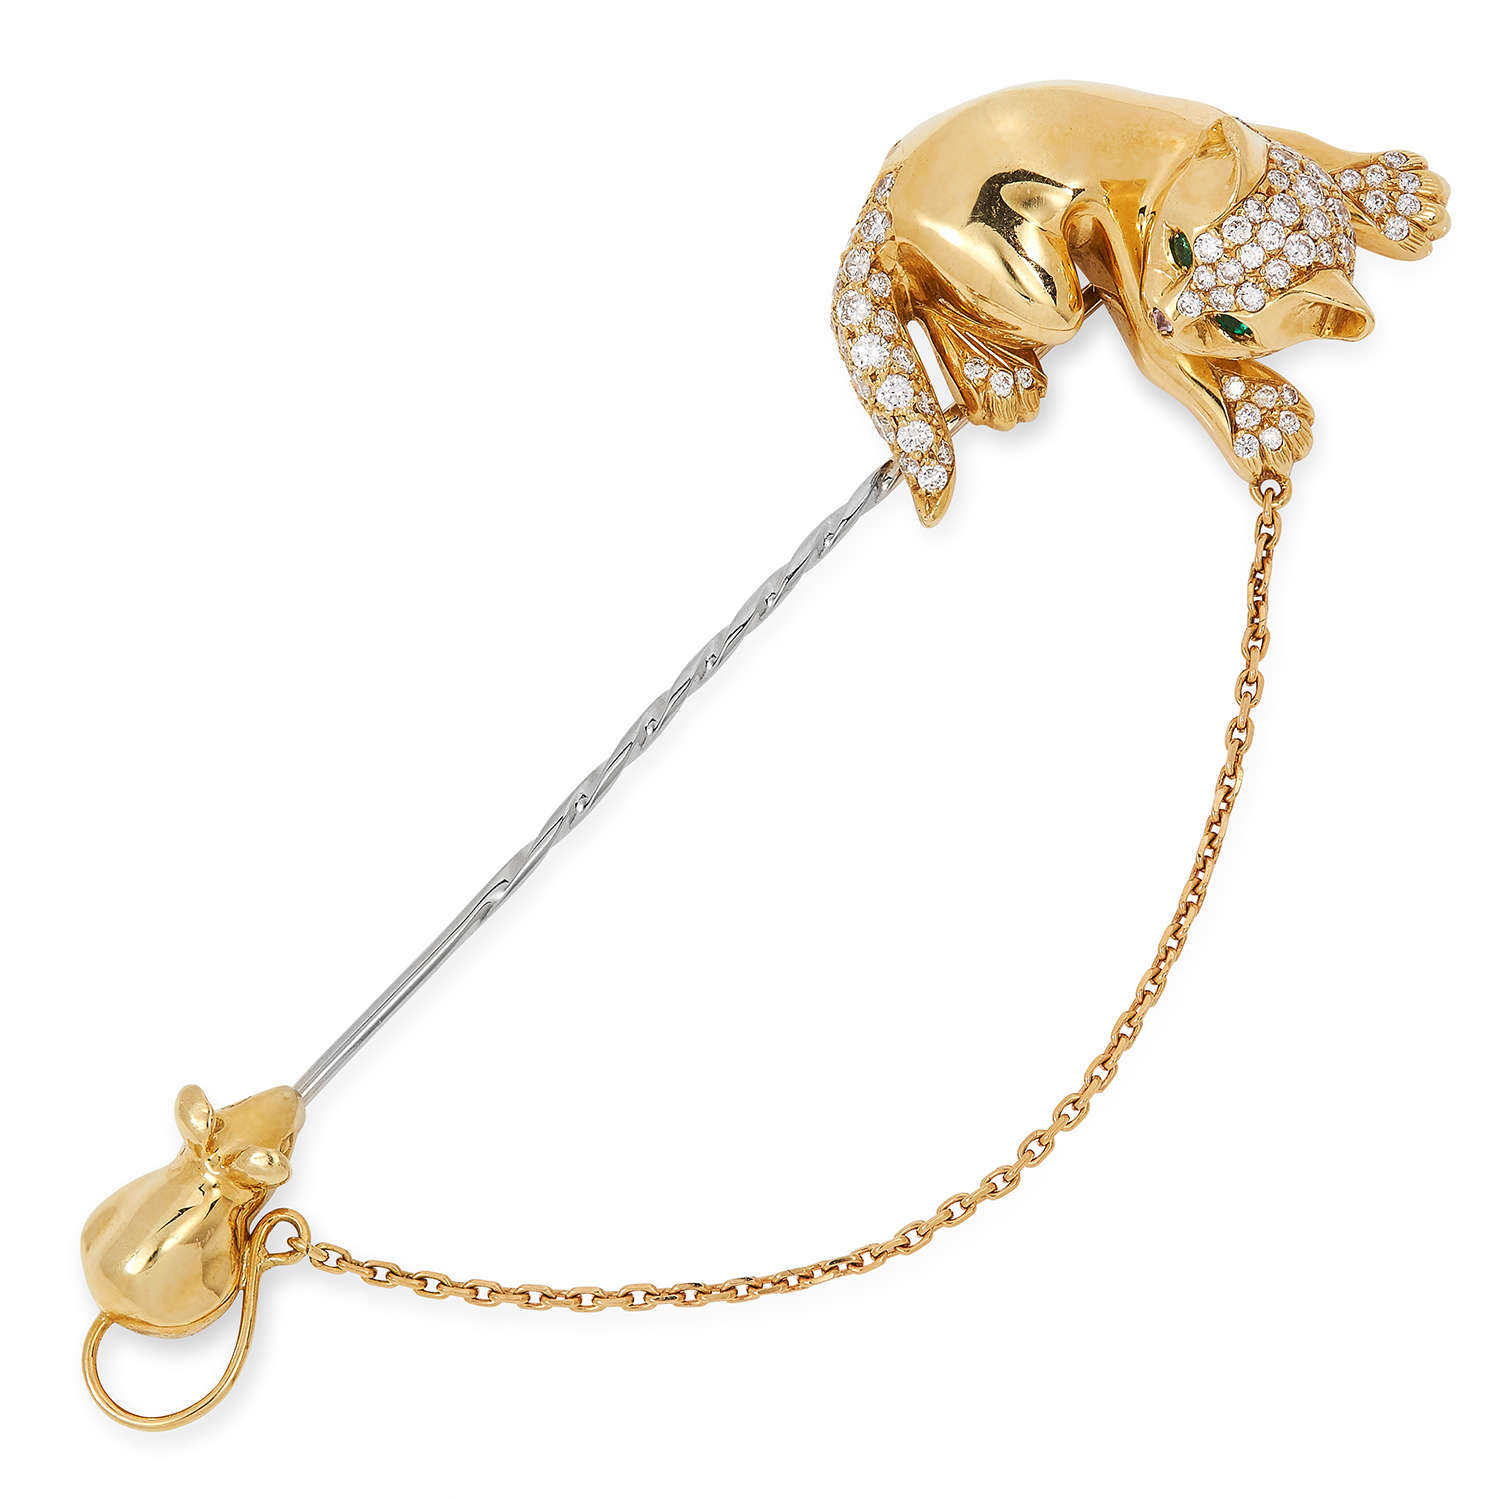 A DIAMOND AND EMERALD CAT AND MOUSE PIN / BROOCH, DAVID MORRIS in 18ct yellow gold, the pin - Image 2 of 2